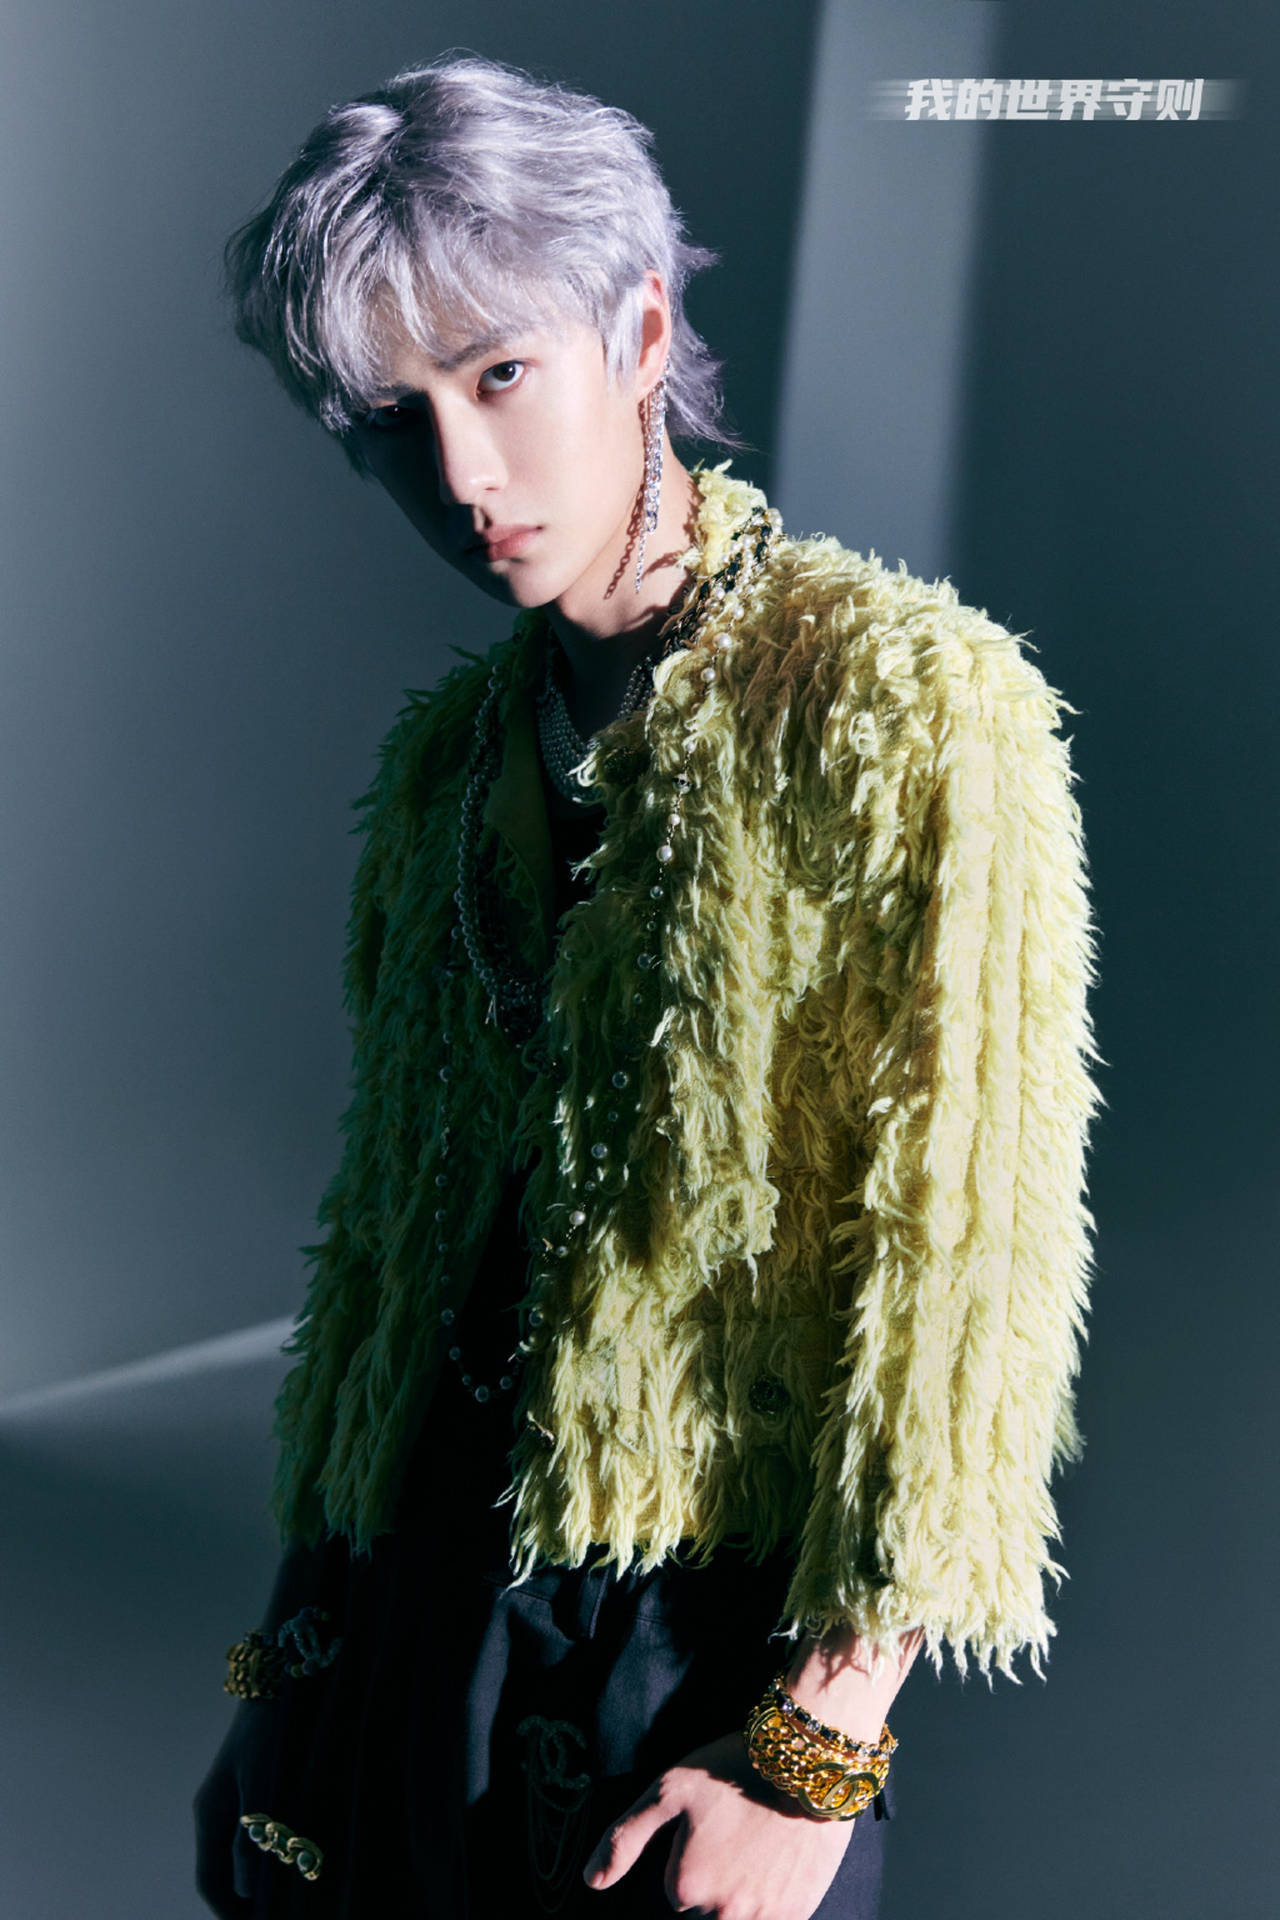 Wang Yibo In My Rules Concept Photo